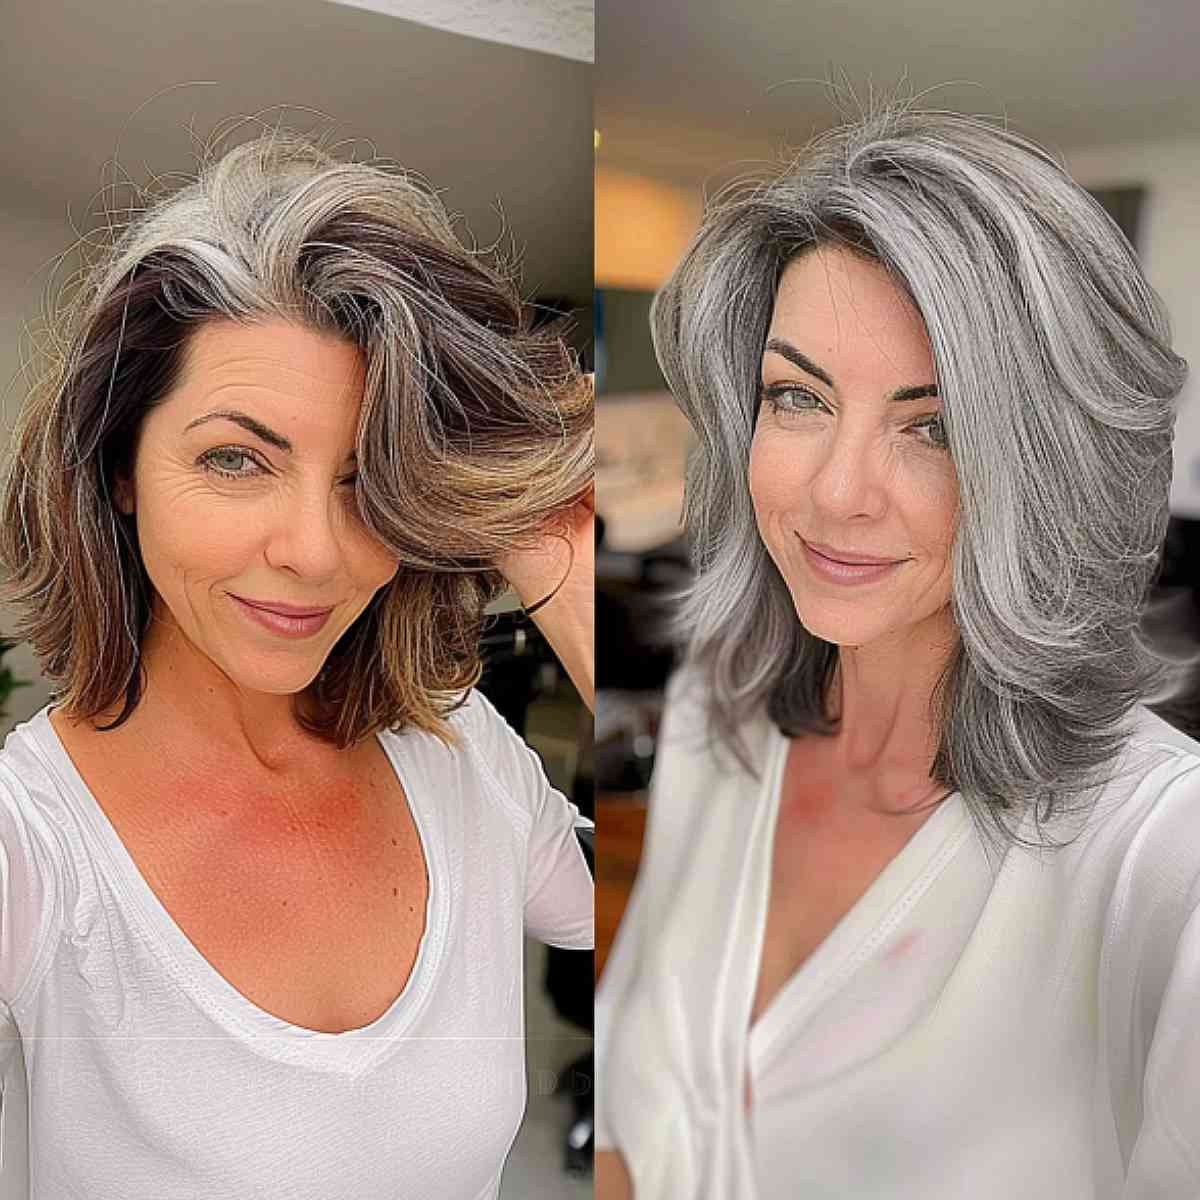 Chic silver layered hair with dark roots for a mature, sophisticated makeover.